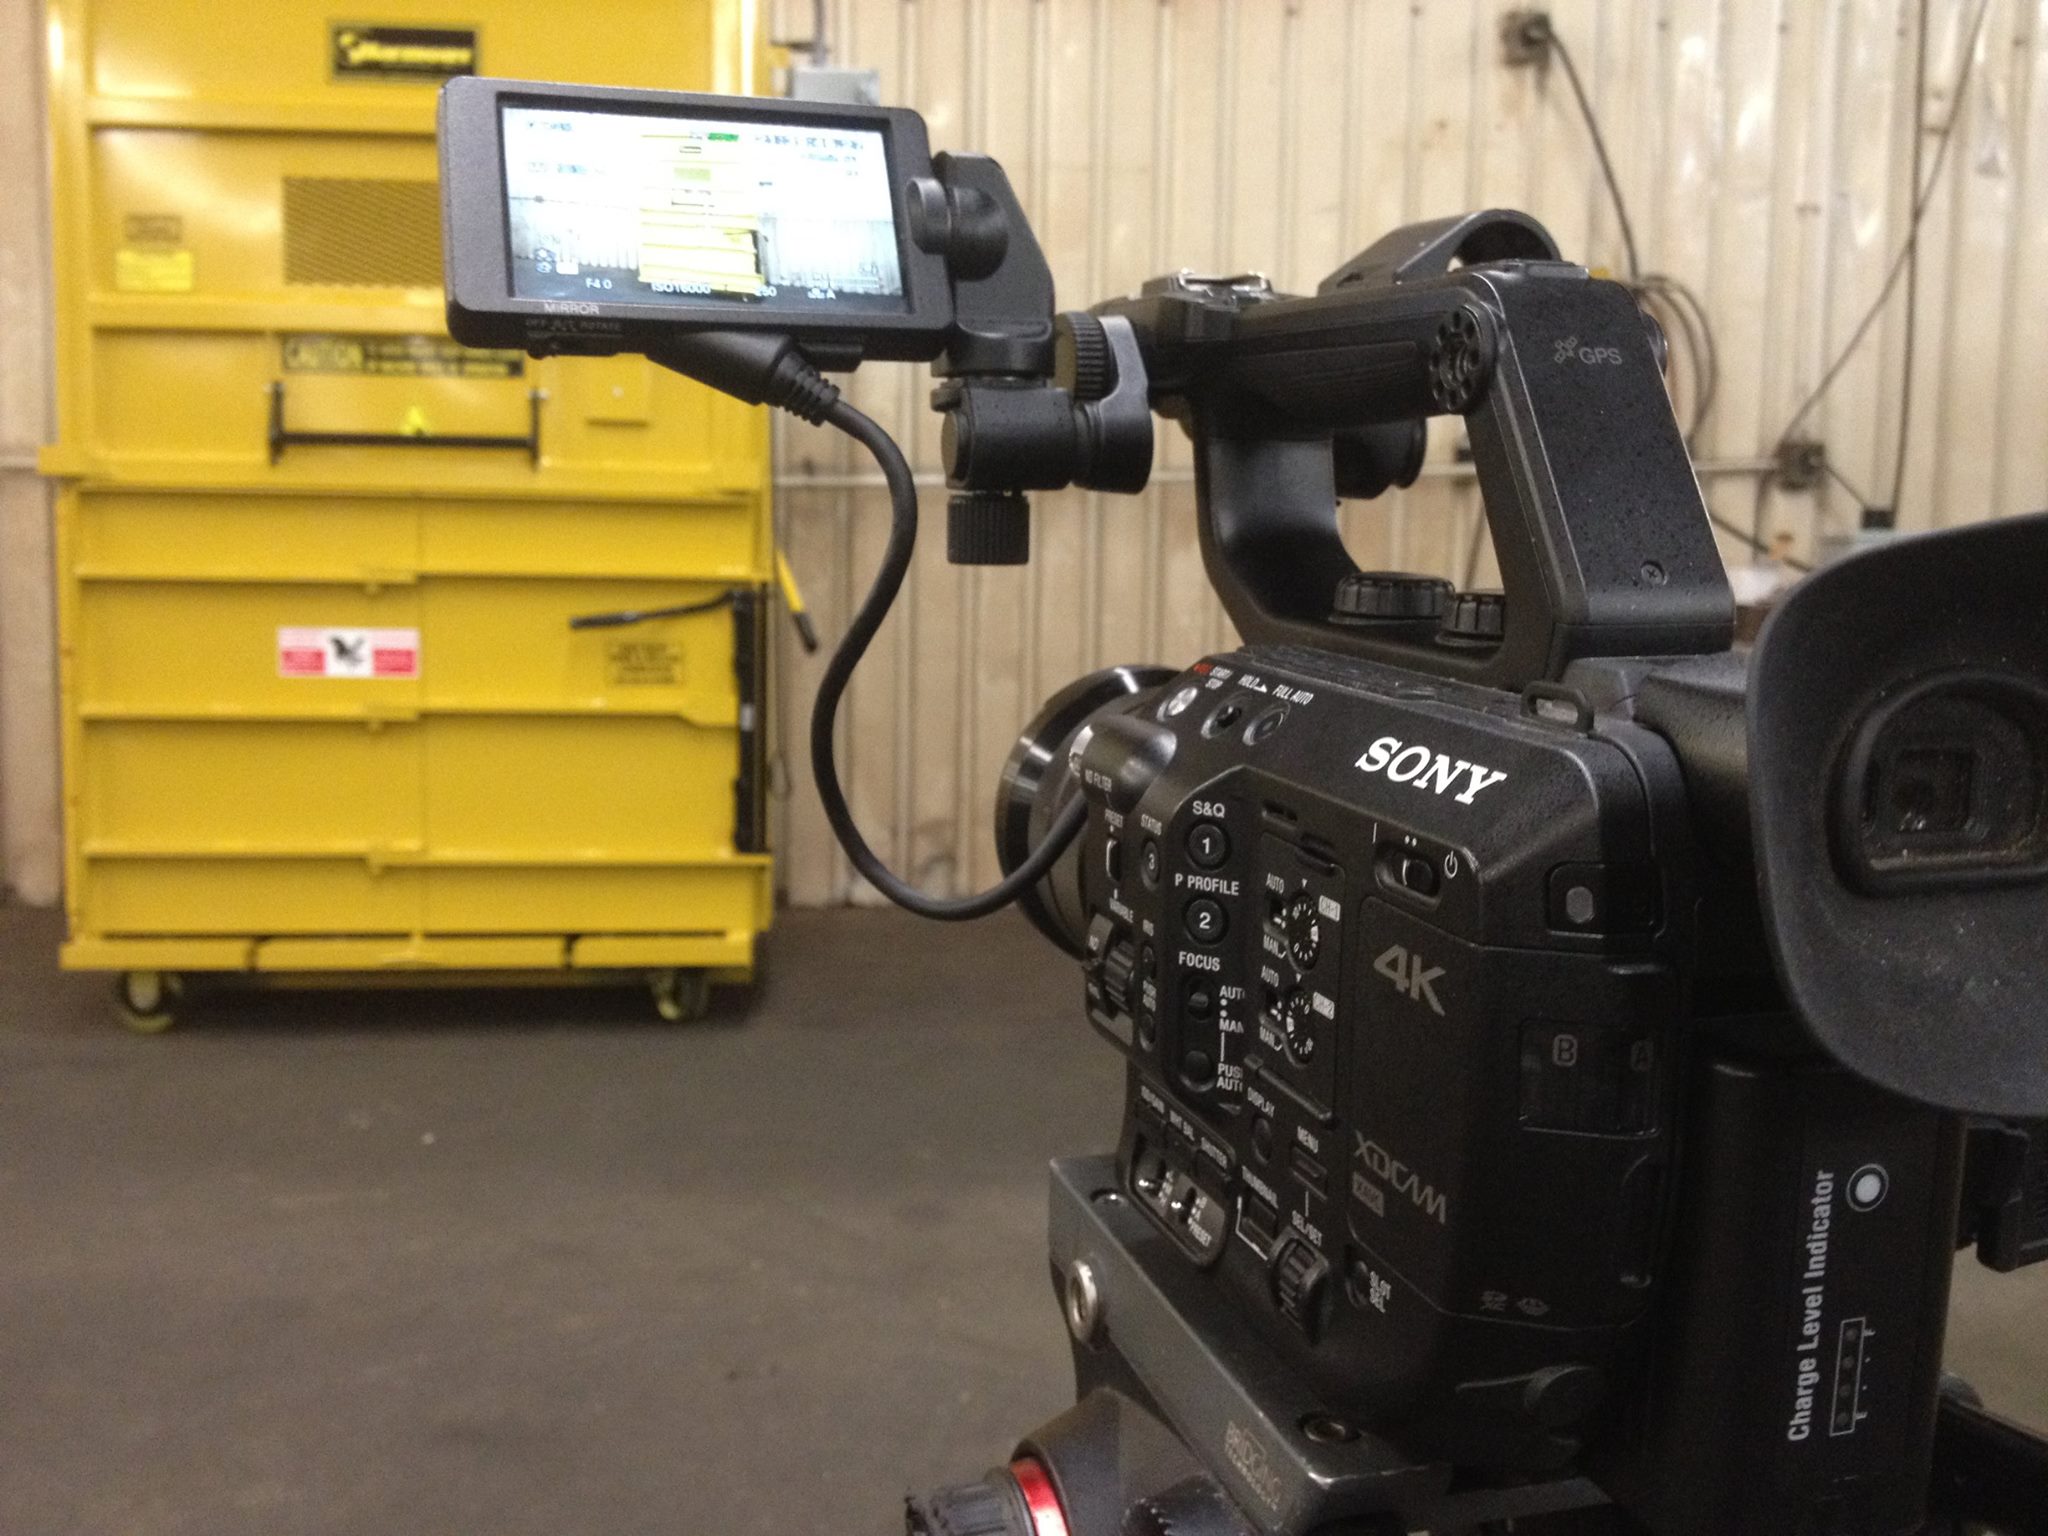 Flying Buttress Media production of our new cardboard baler video on the M42BC Cardboard Baler